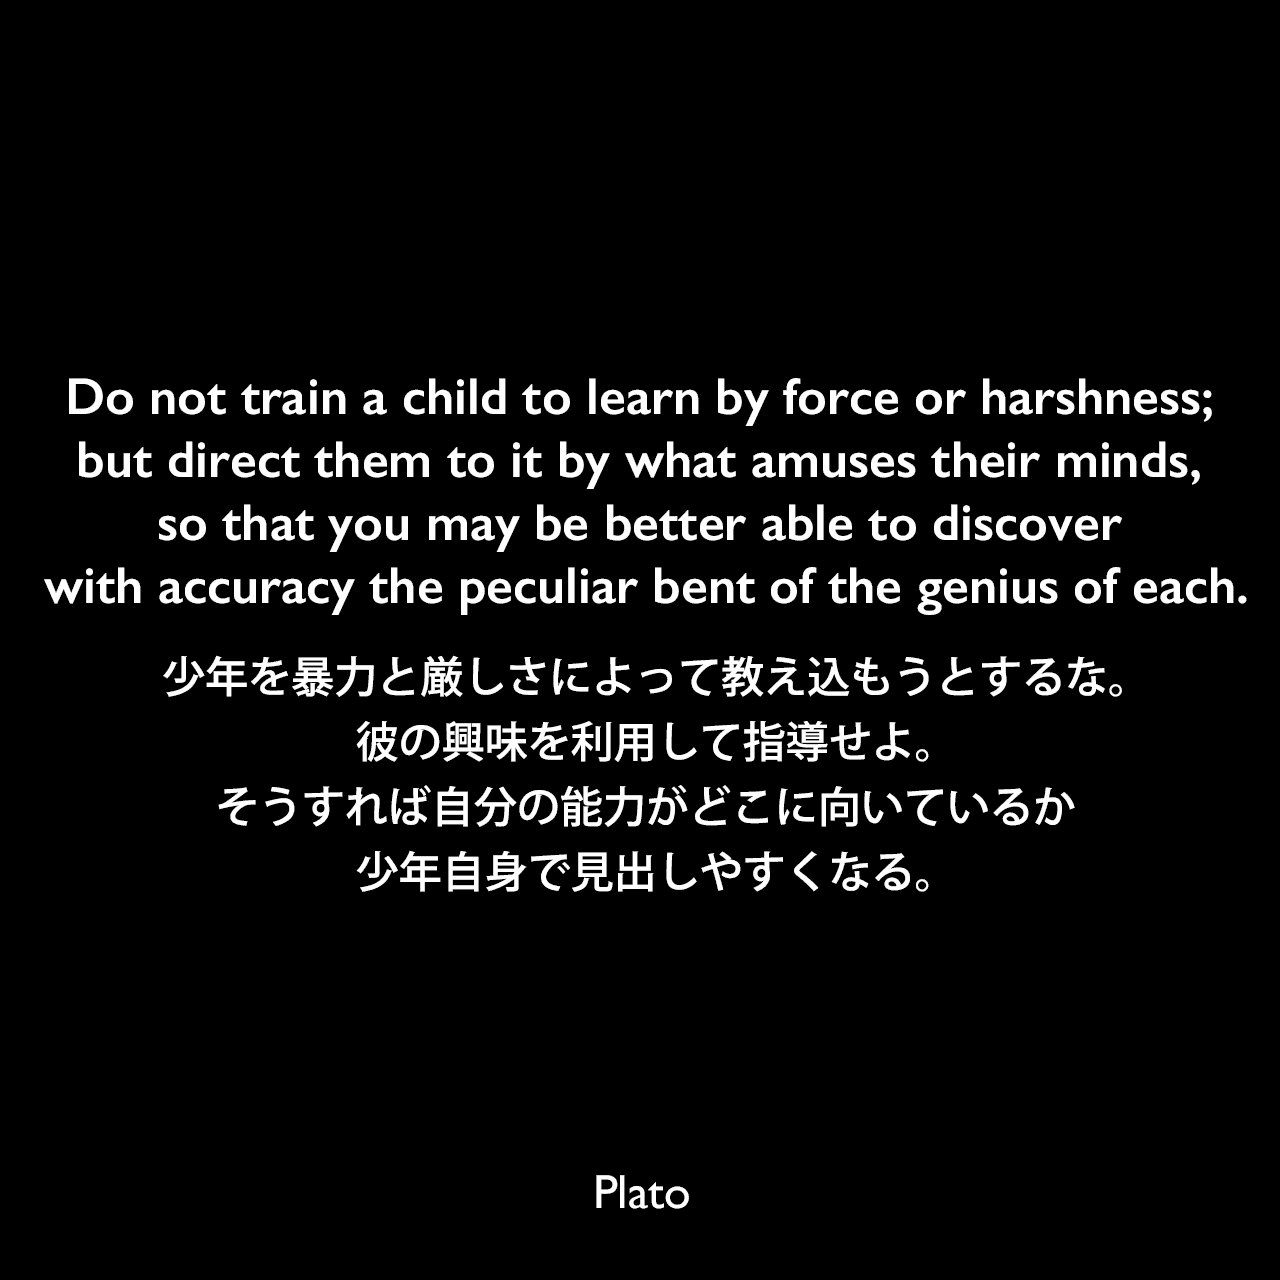 Do not train a child to learn by force or harshness; but direct them to it by what amuses their minds, so that you may be better able to discover with accuracy the peculiar bent of the genius of each.少年を暴力と厳しさによって教え込もうとするな。彼の興味を利用して指導せよ。そうすれば自分の能力がどこに向いているか、少年自身で見出しやすくなる。Plato